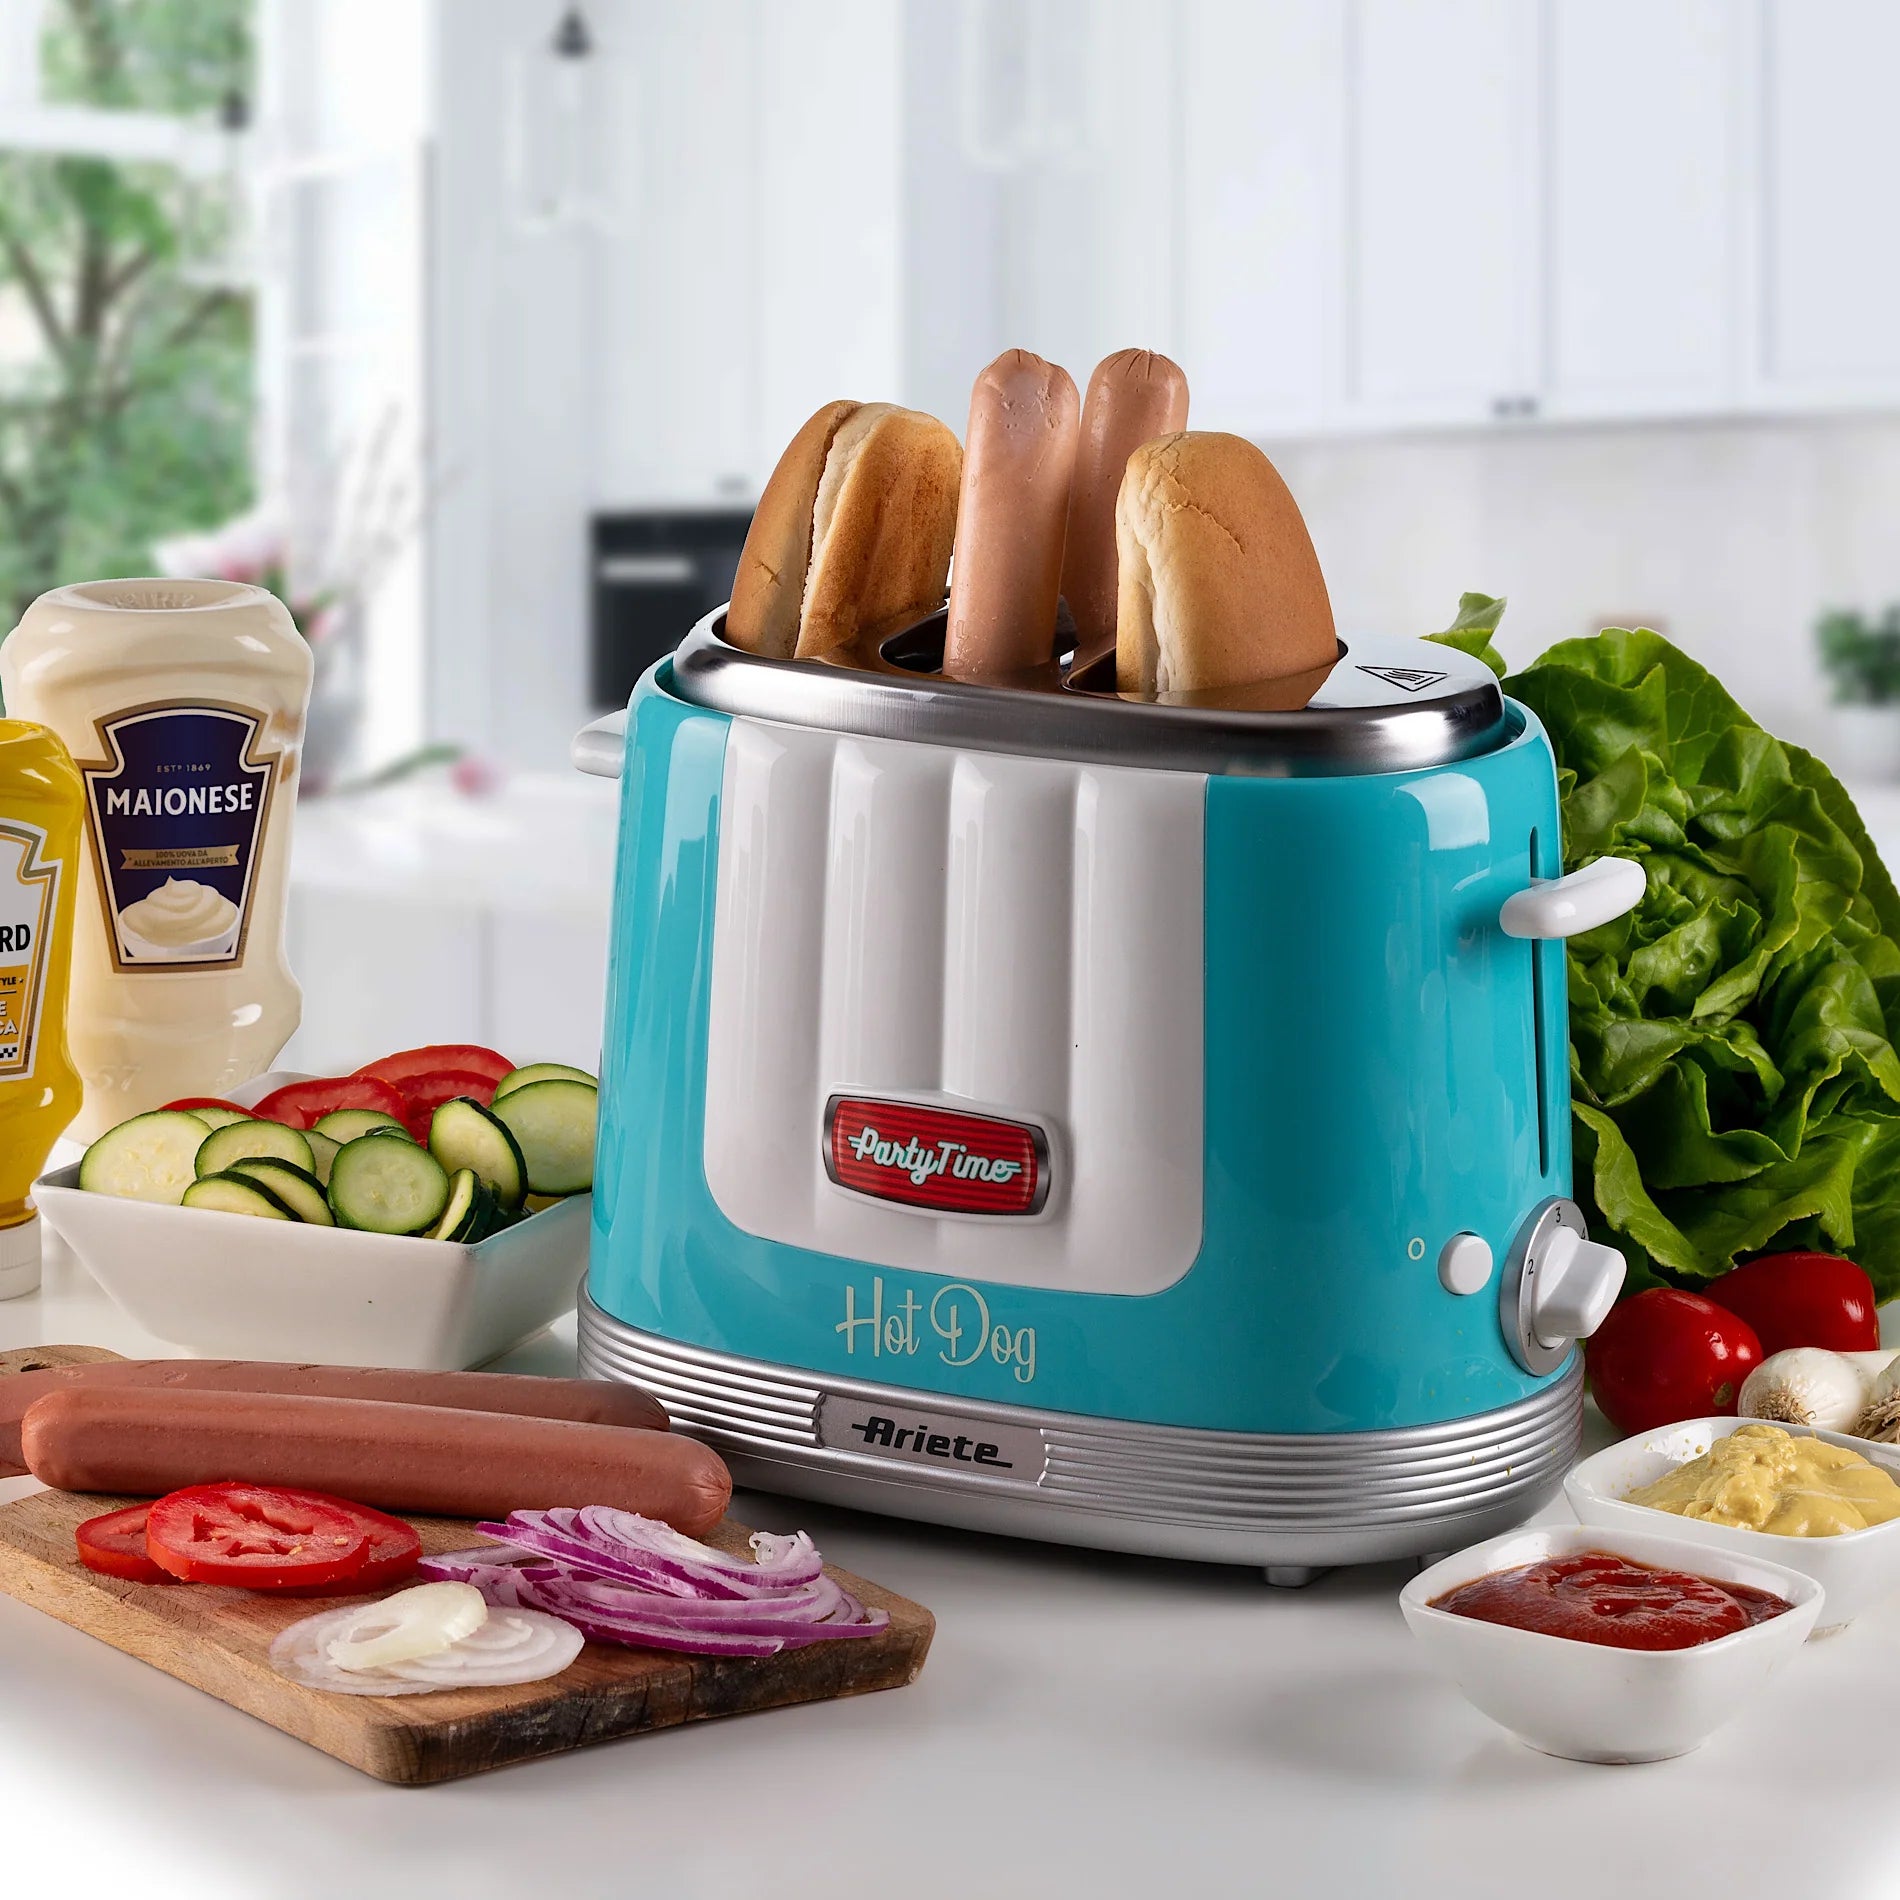 party Ariete maker Hot time dog